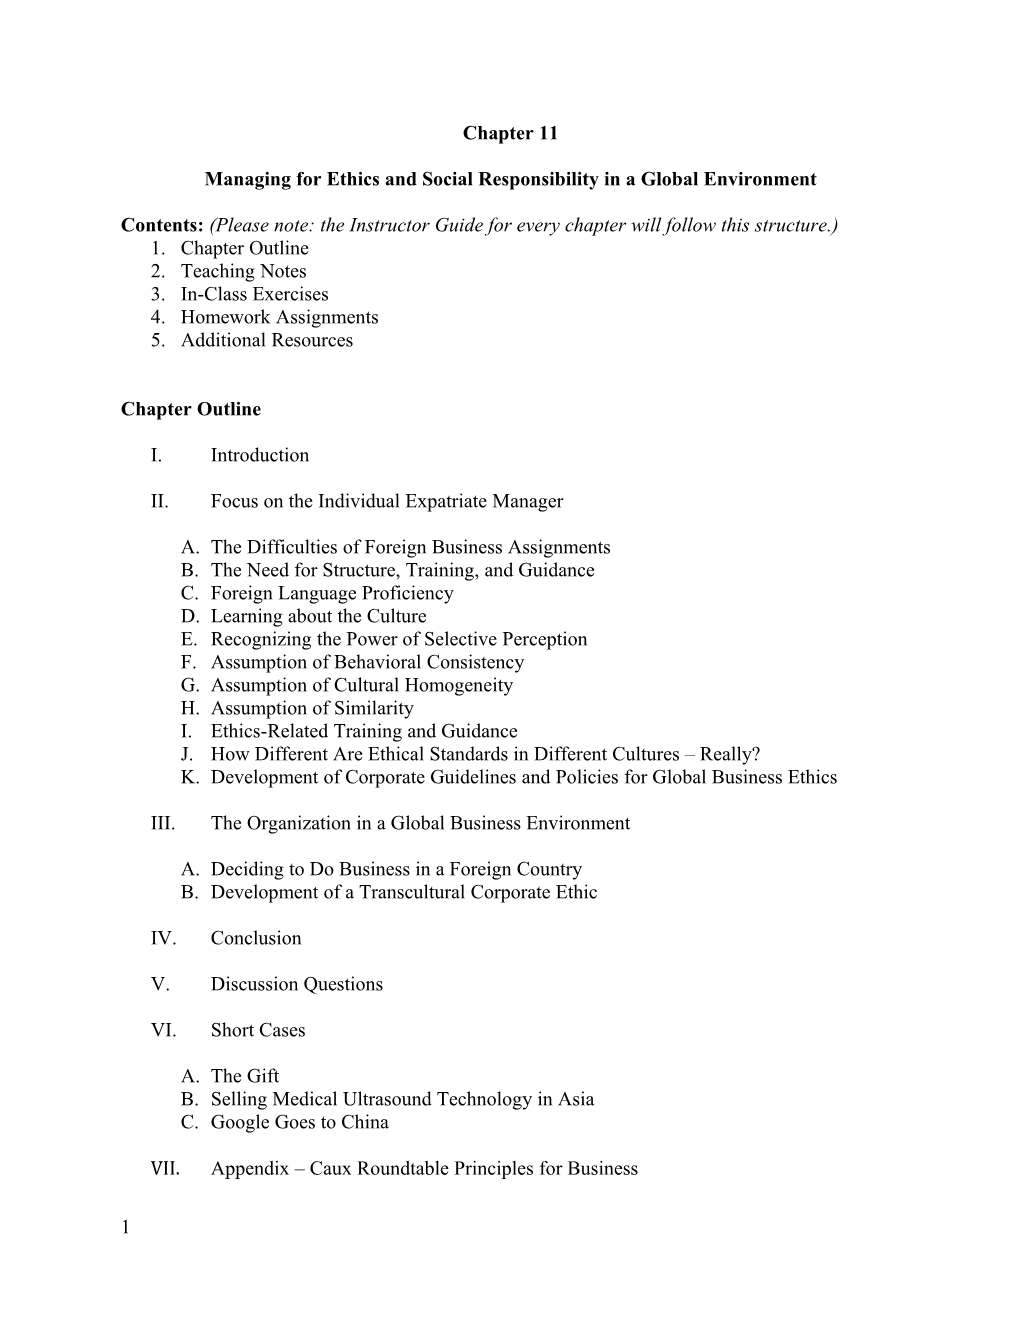 Managing for Ethics and Social Responsibility in a Global Environment